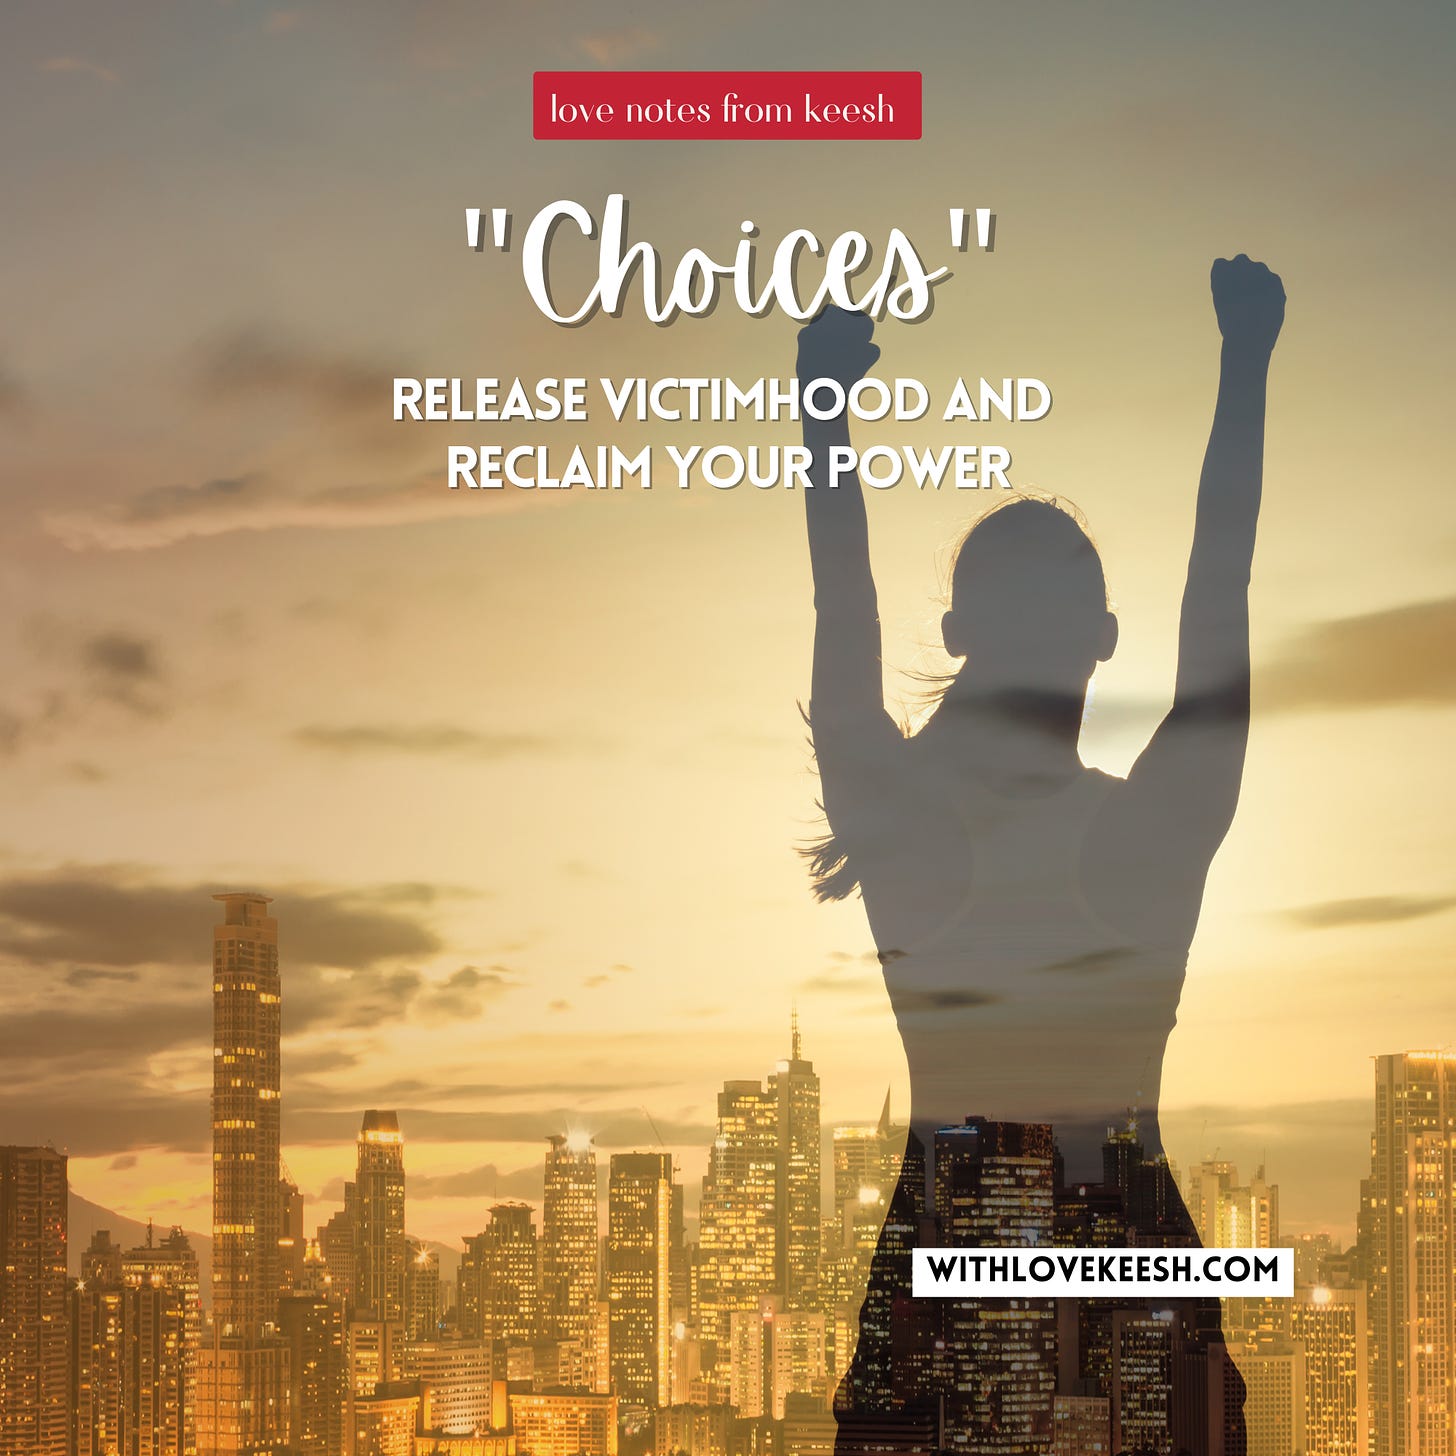 "Choices" Release victimhood and reclaim your power